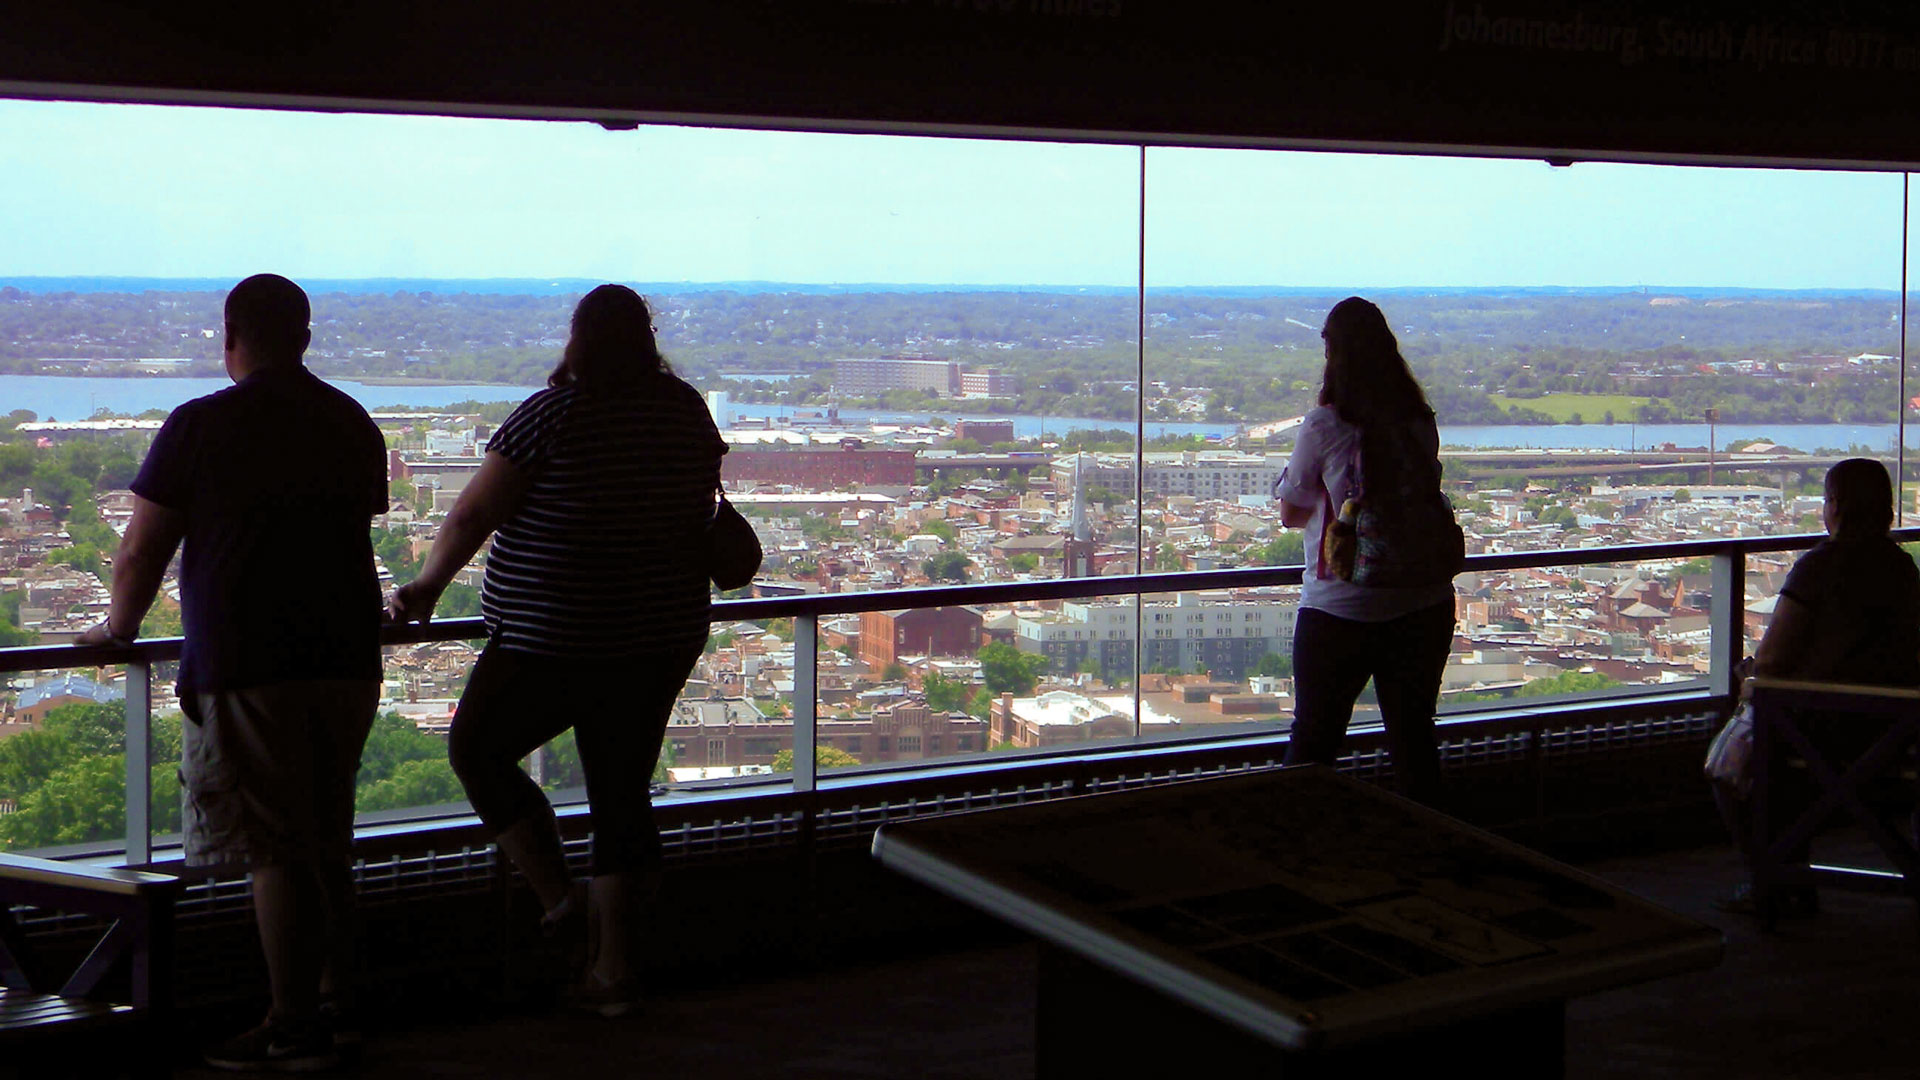 Views from Baltimore's Top of the World Observation Level viewing deck.